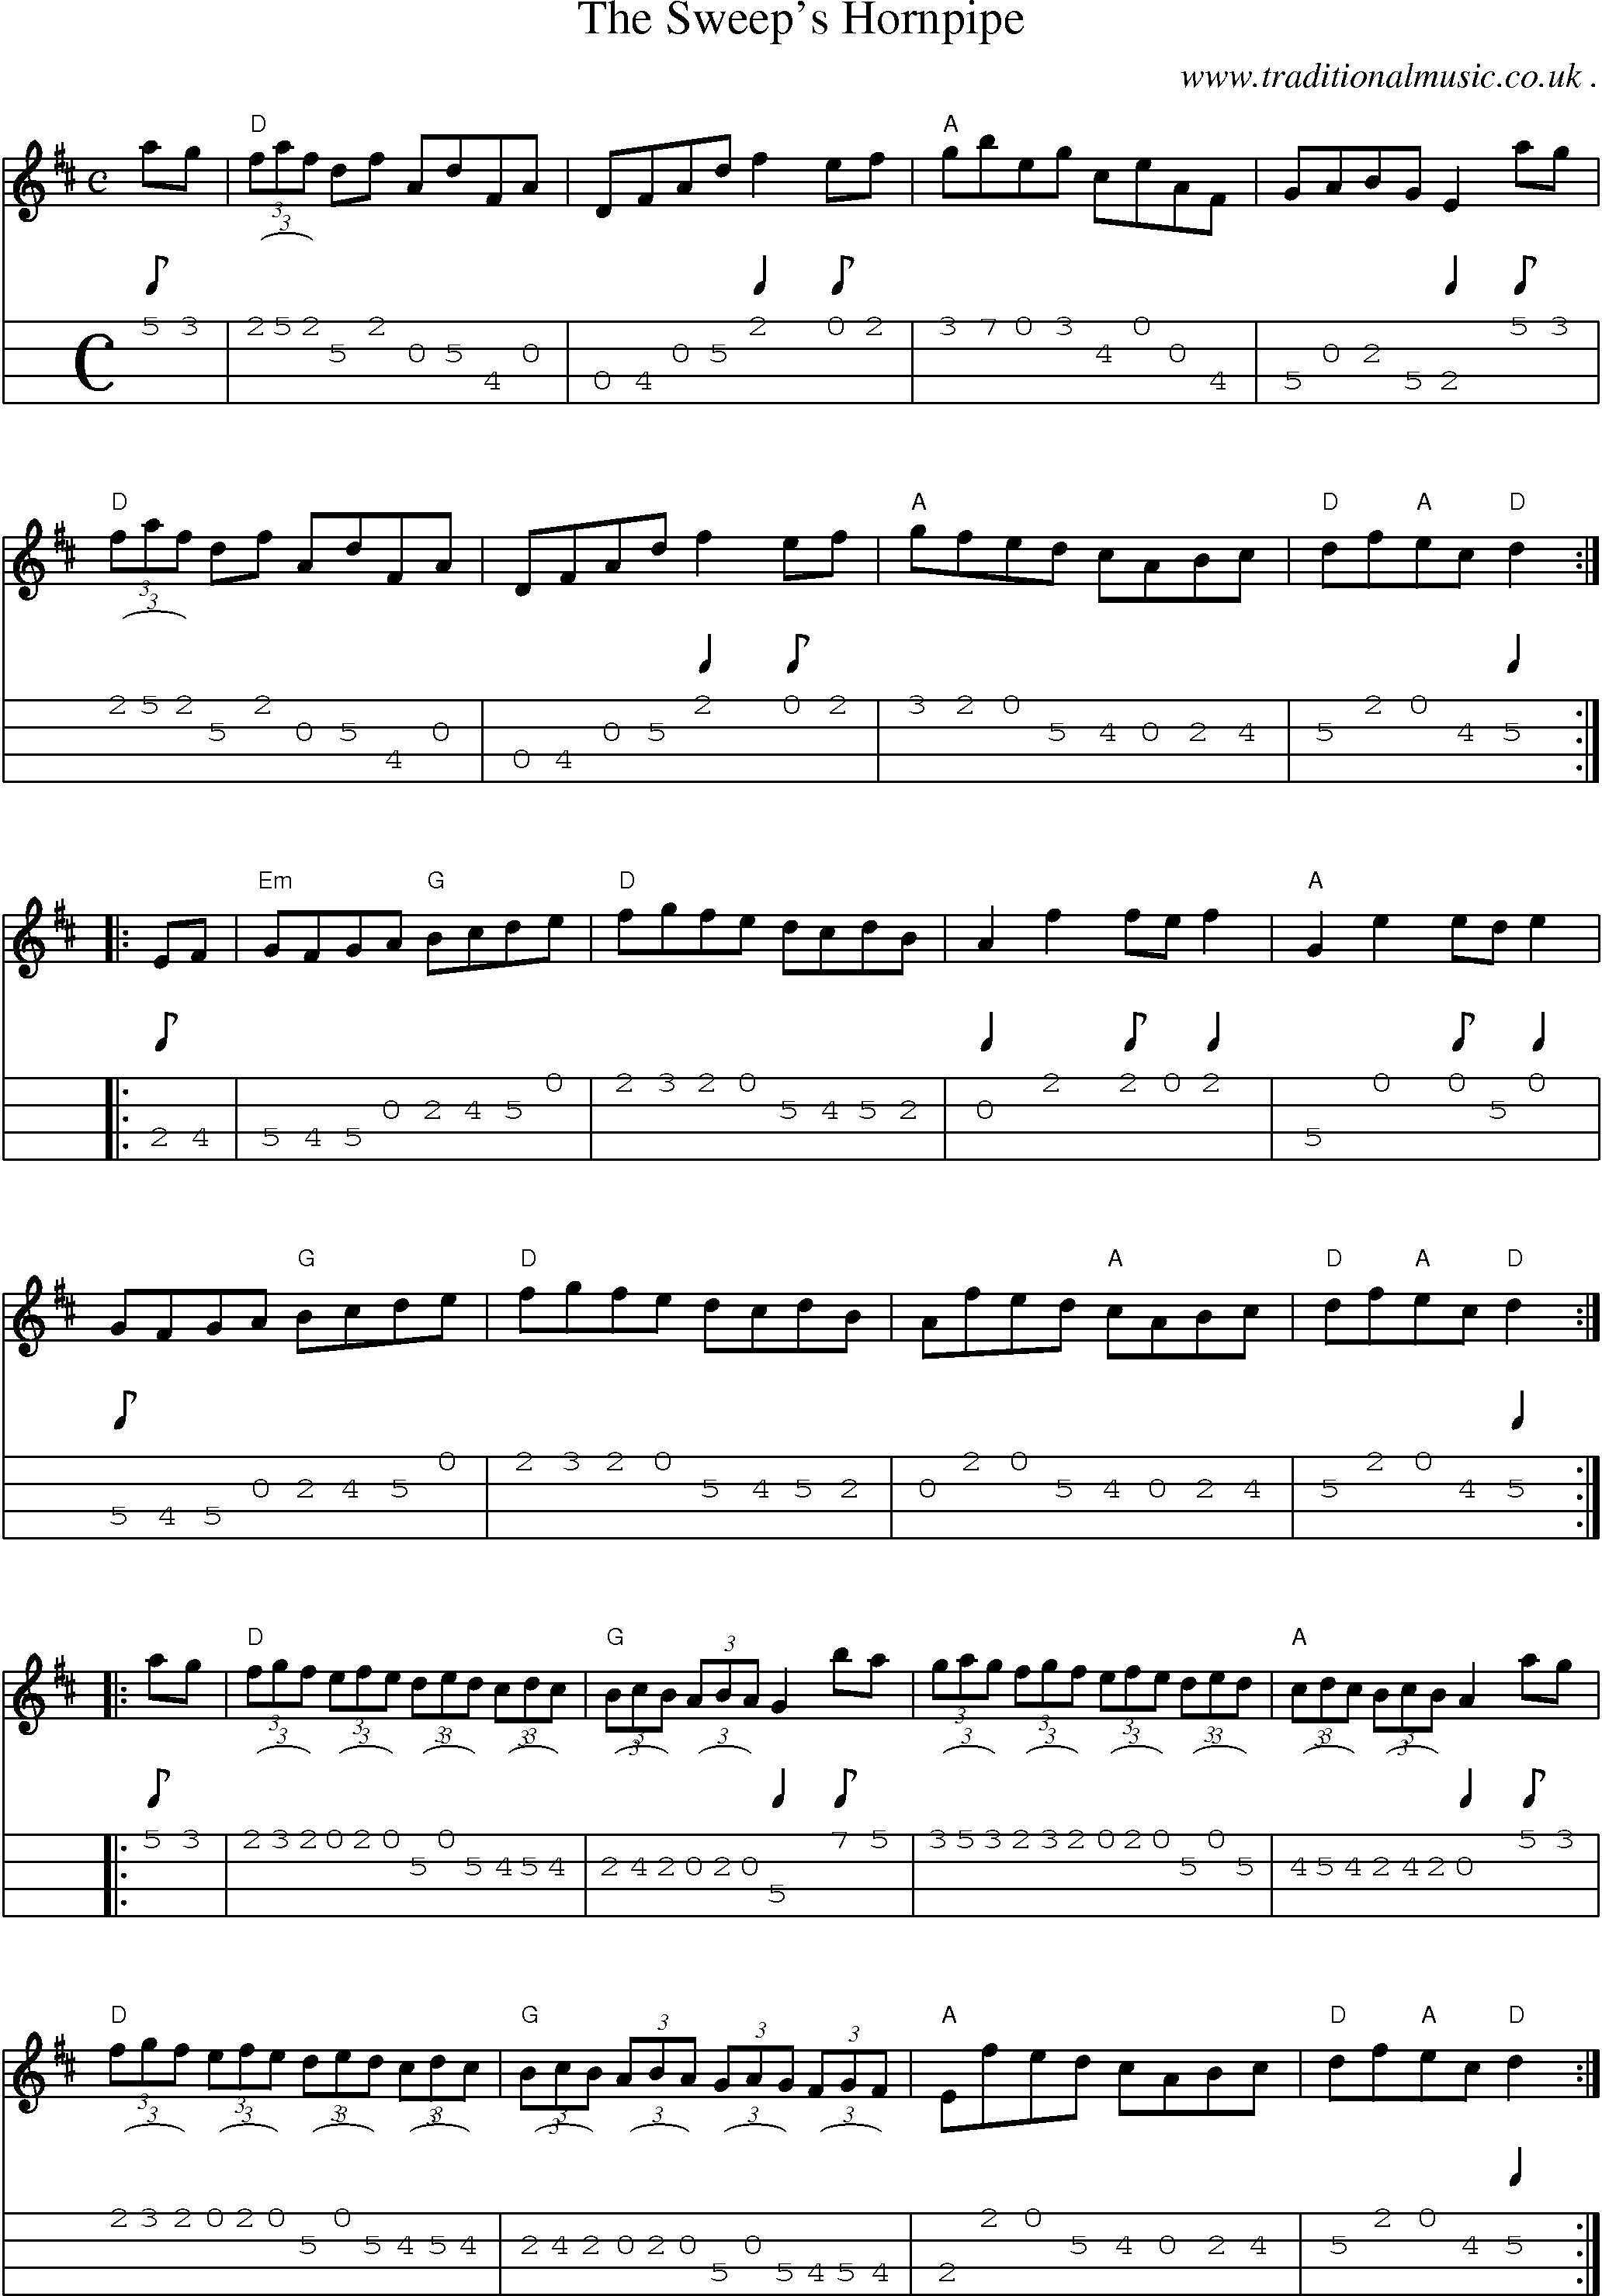 Music Score and Guitar Tabs for The Sweeps Hornpipe